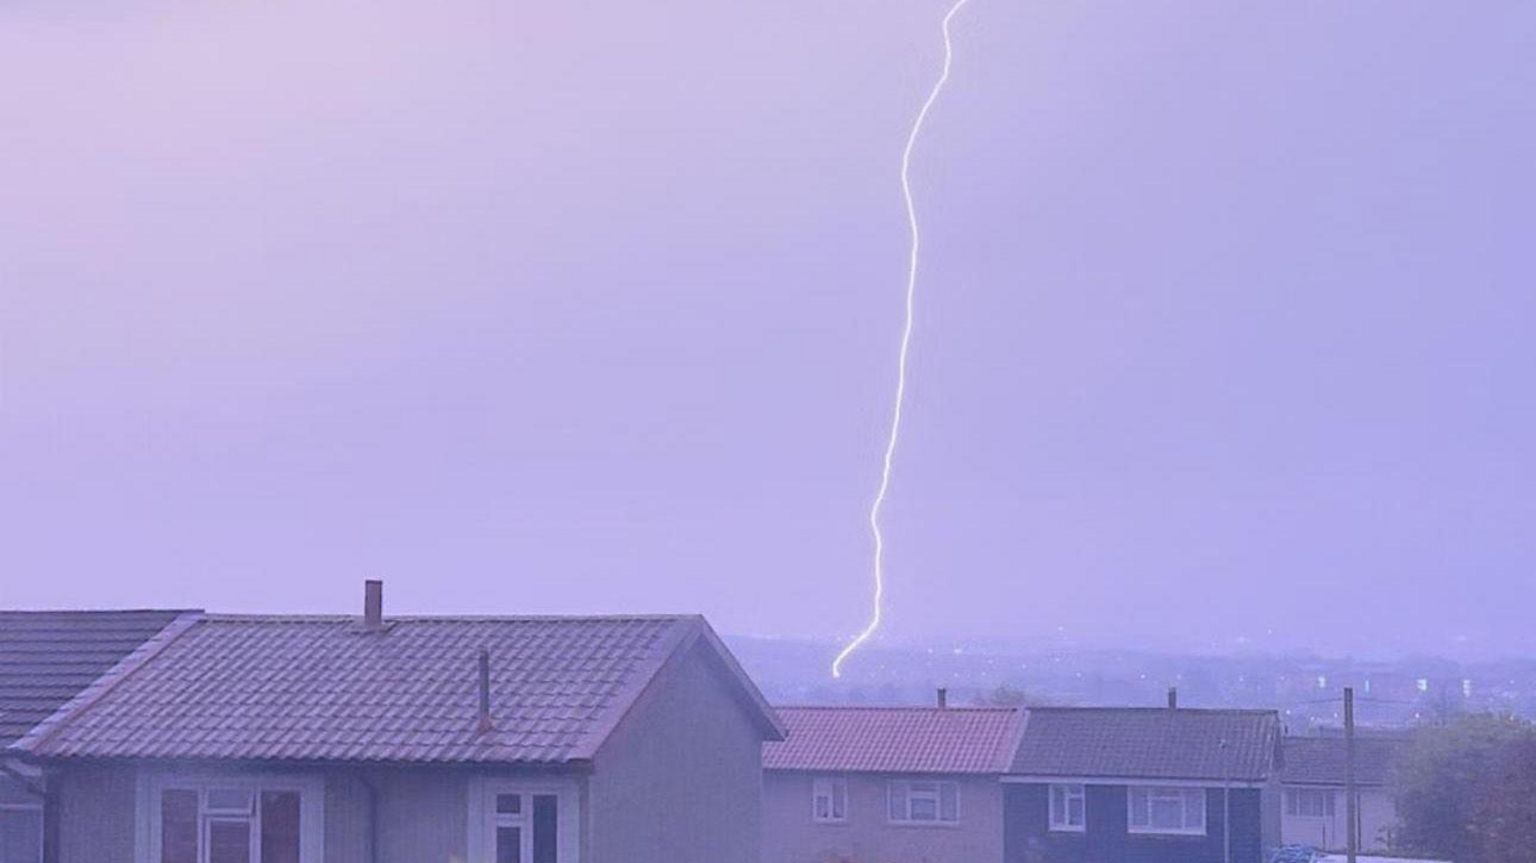 A vertical lightning strike crashes down above houses in Portsmouth